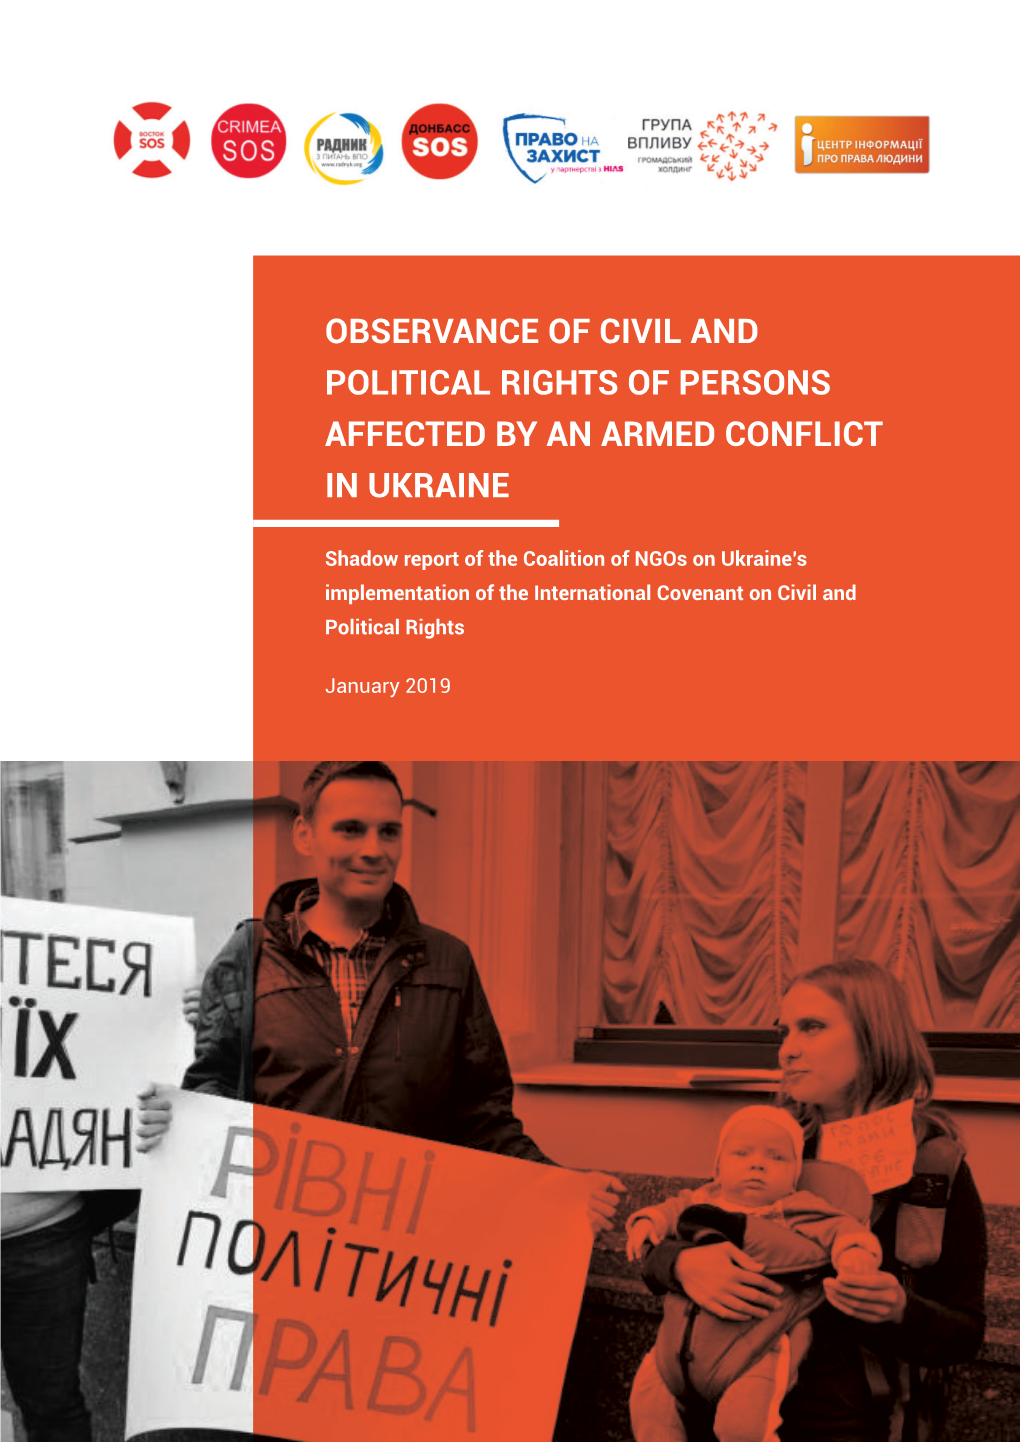 Observance of Civil and Political Rights of Persons Affected by an Armed Conflict in Ukraine